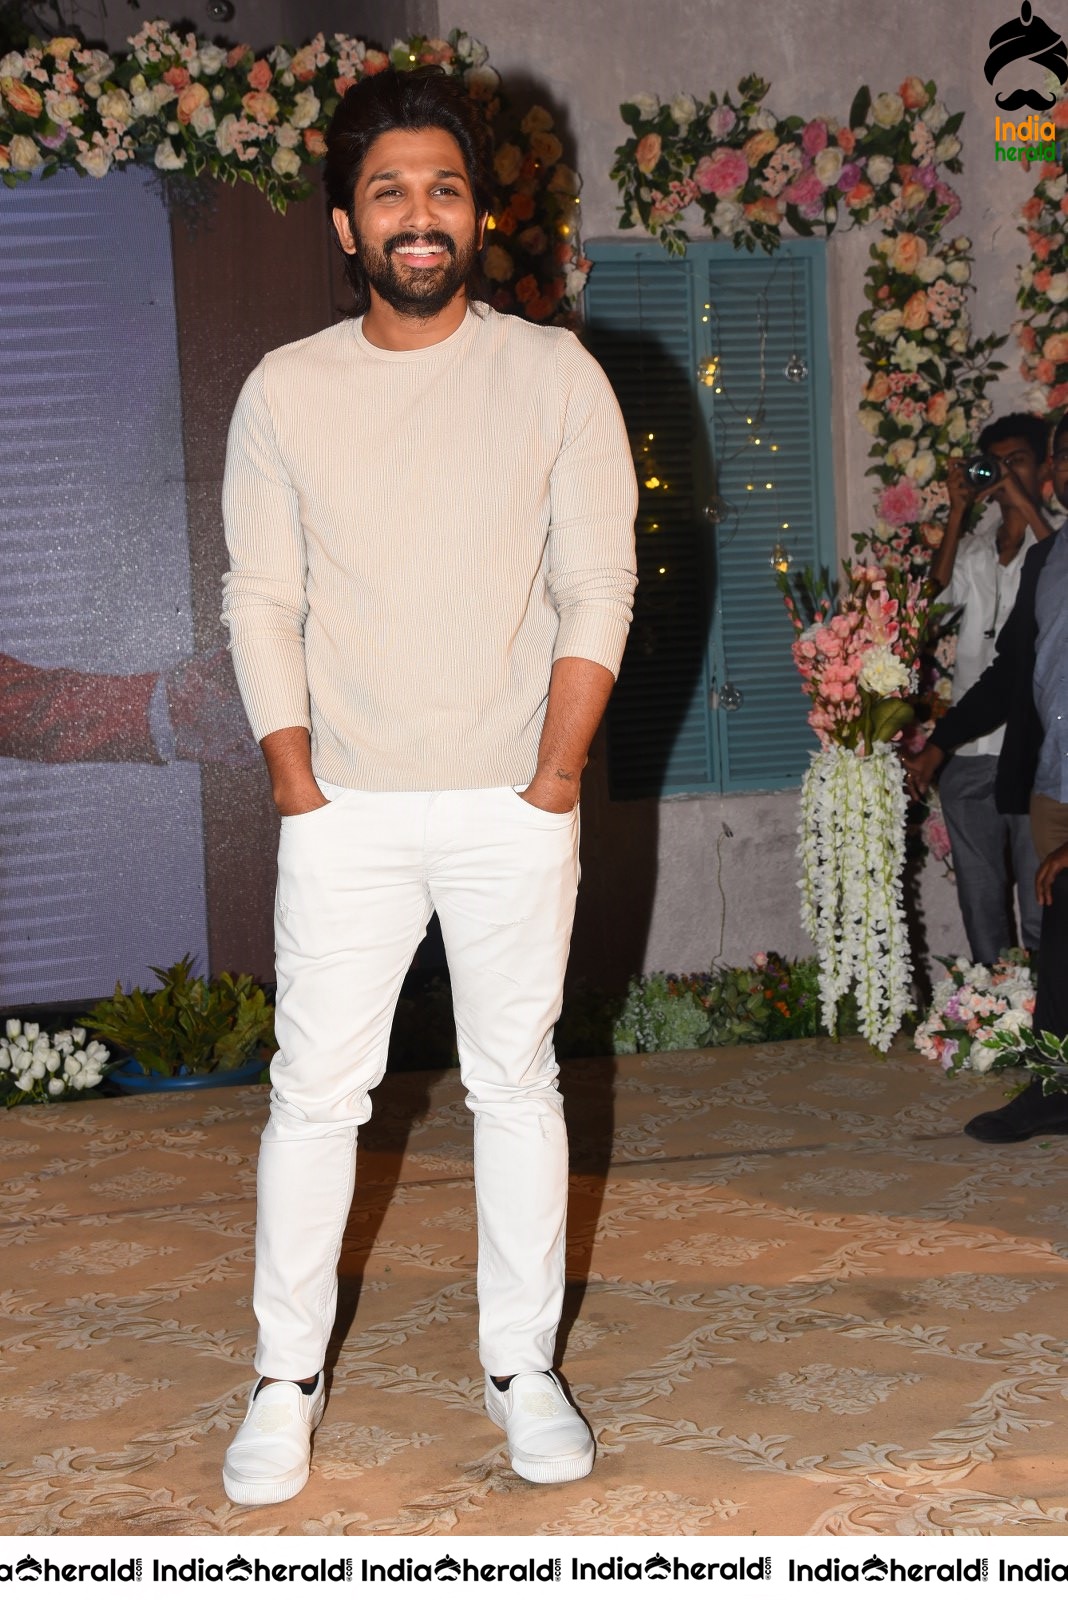 Actor Allu Arjun Looking Stylish and Suave in these latest clicks Set 2